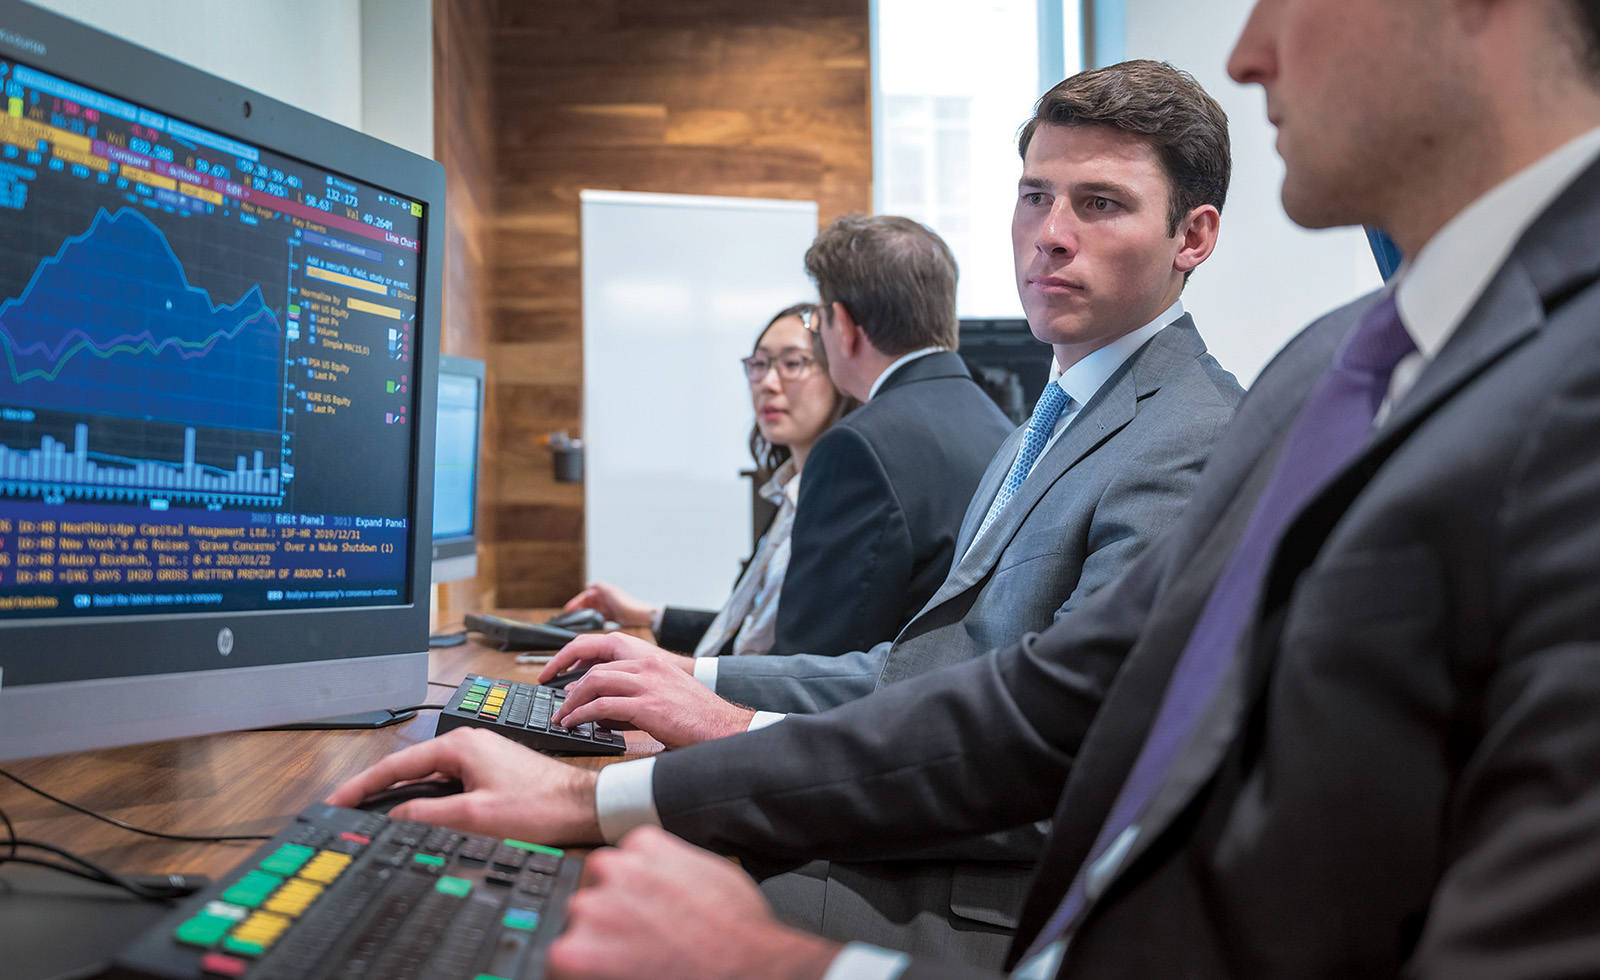 Man in suit looks at a screen with financial data